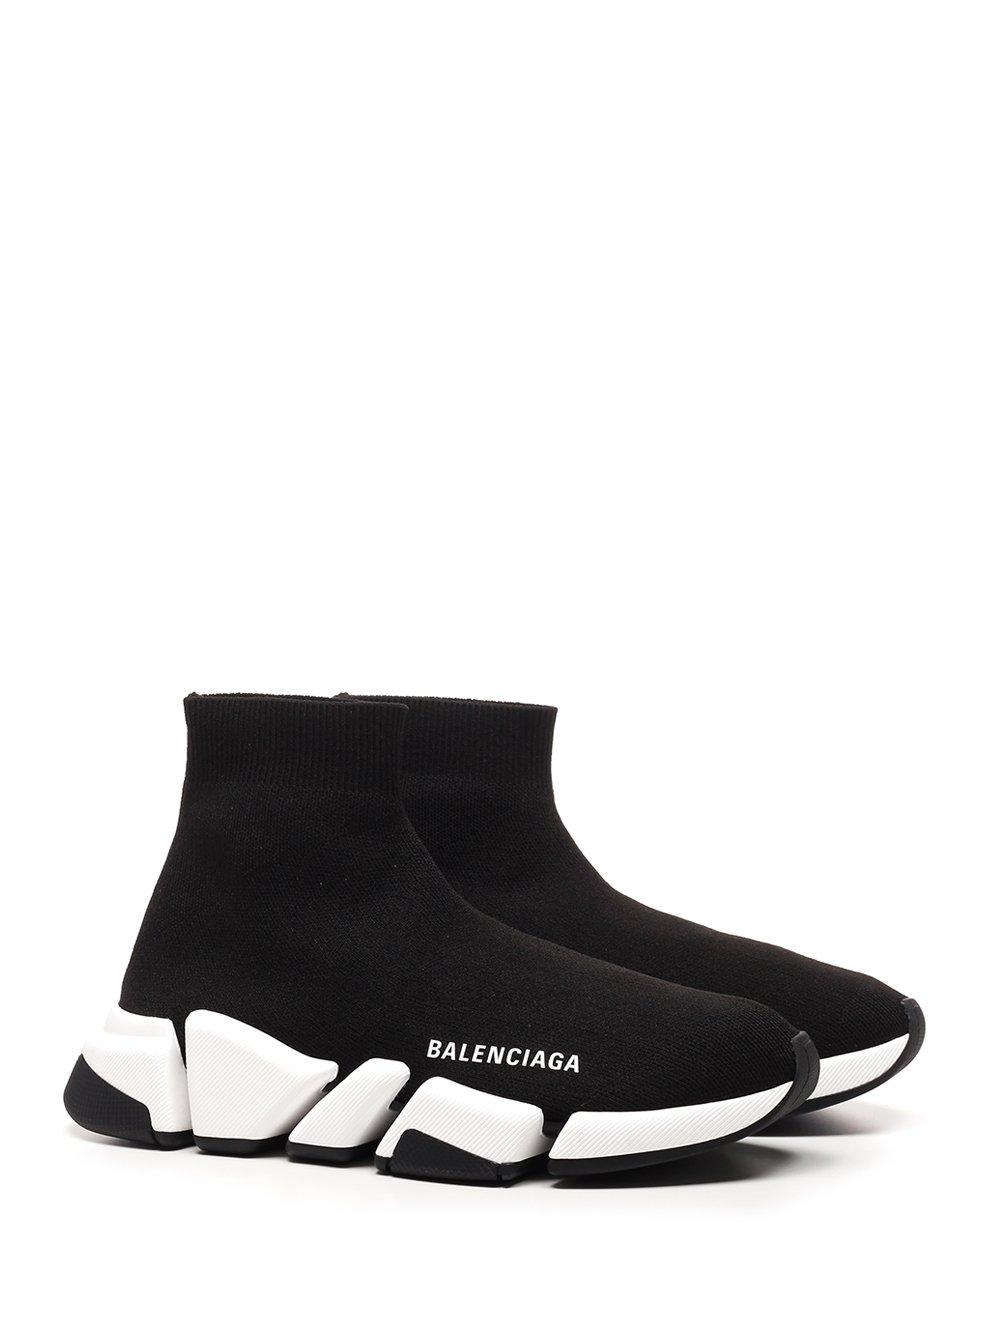 Balenciaga Synthetic Speed 2.0 Sneakers in Black - Lyst